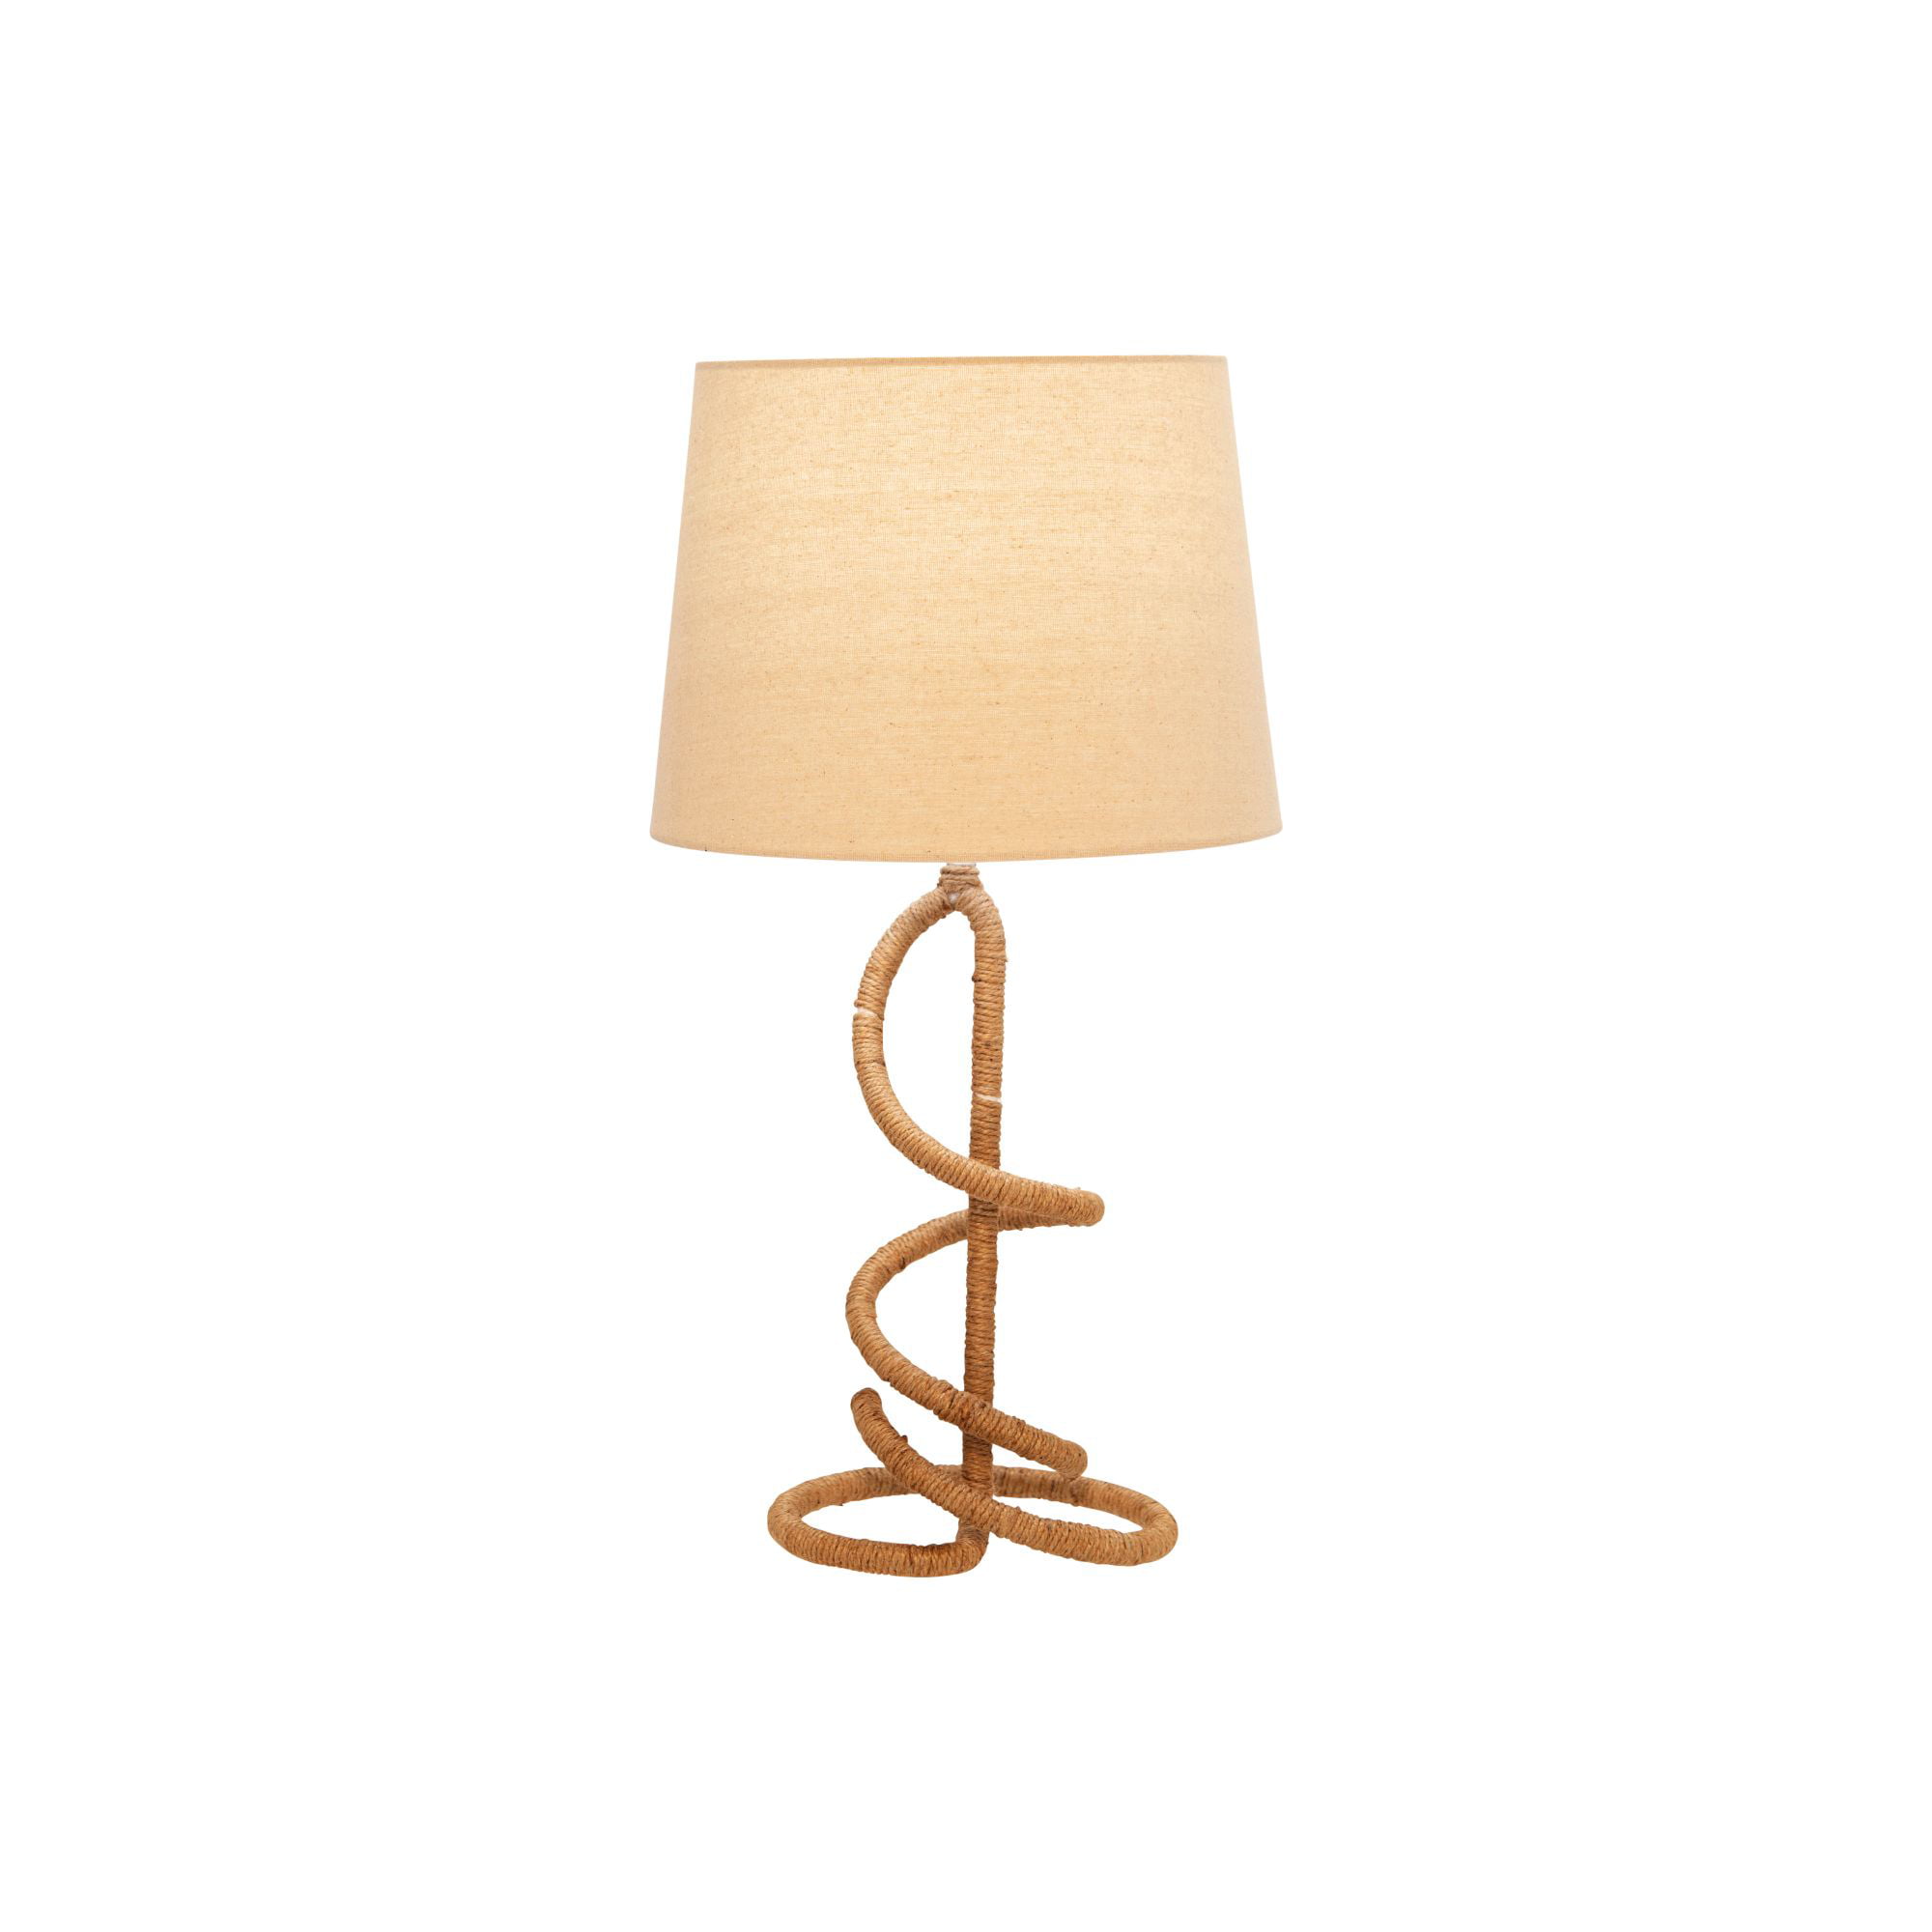 Shades Of Brown Twist Table Lamp Decor, Twist Table Lamp